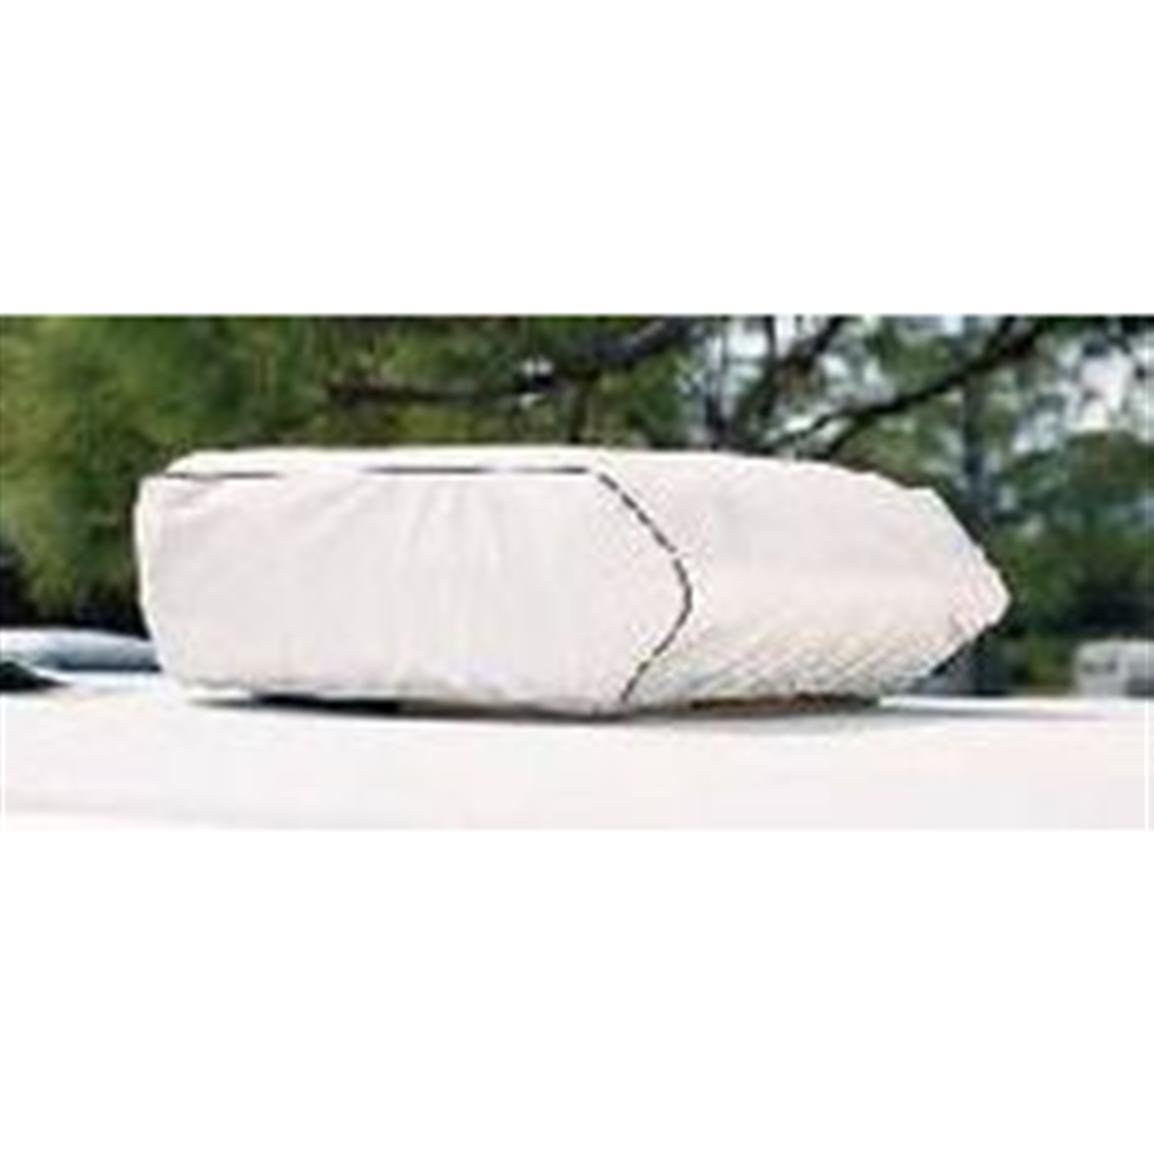 Dometic / DuoTherm Air Conditioner Cover 57791, RV Covers at